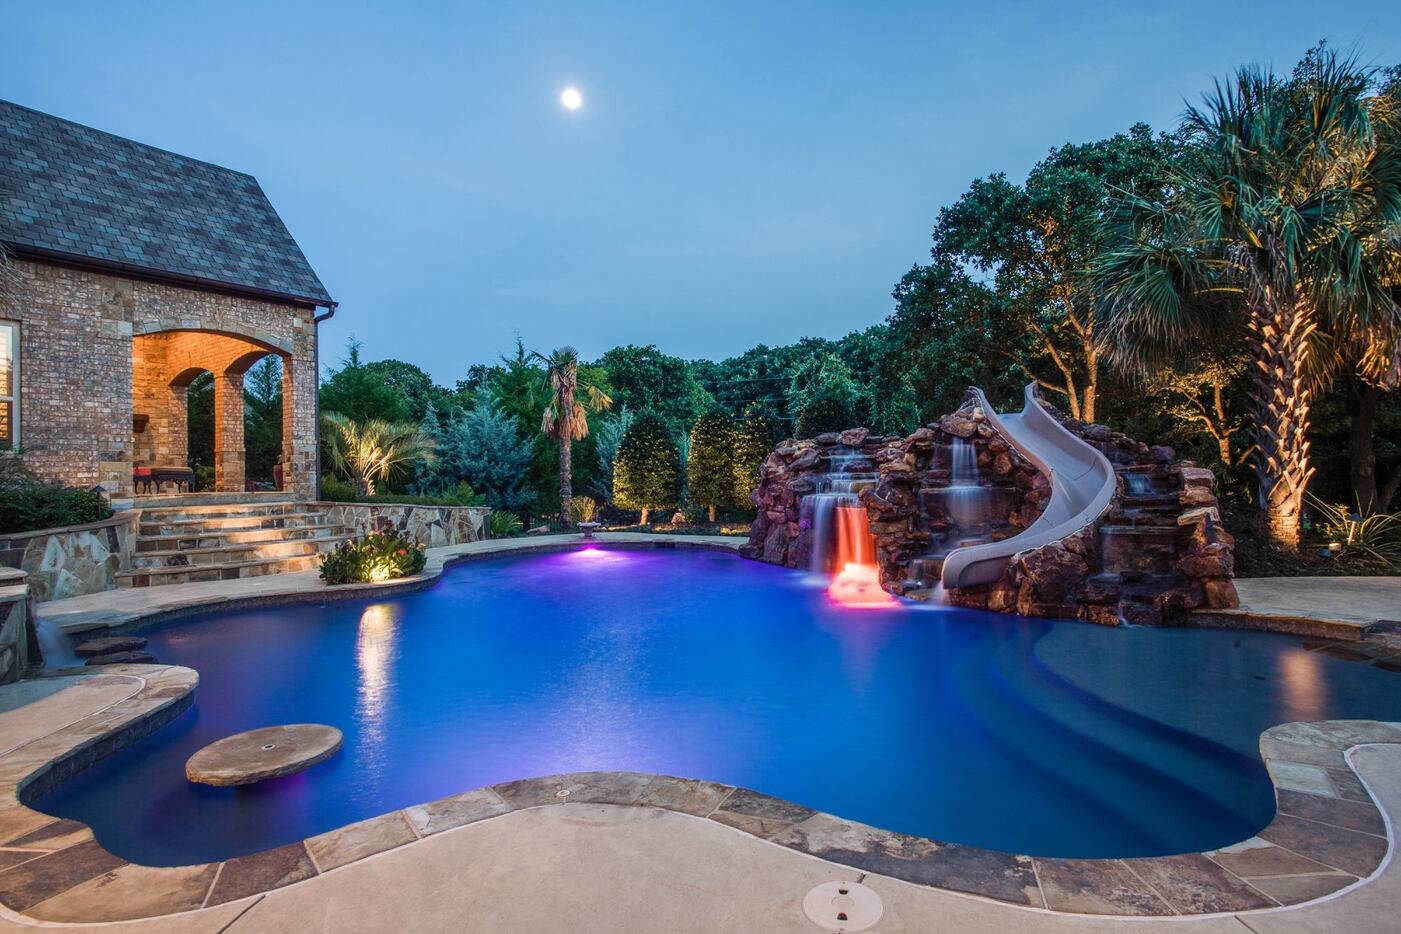 This backyard is a tropical paradise.